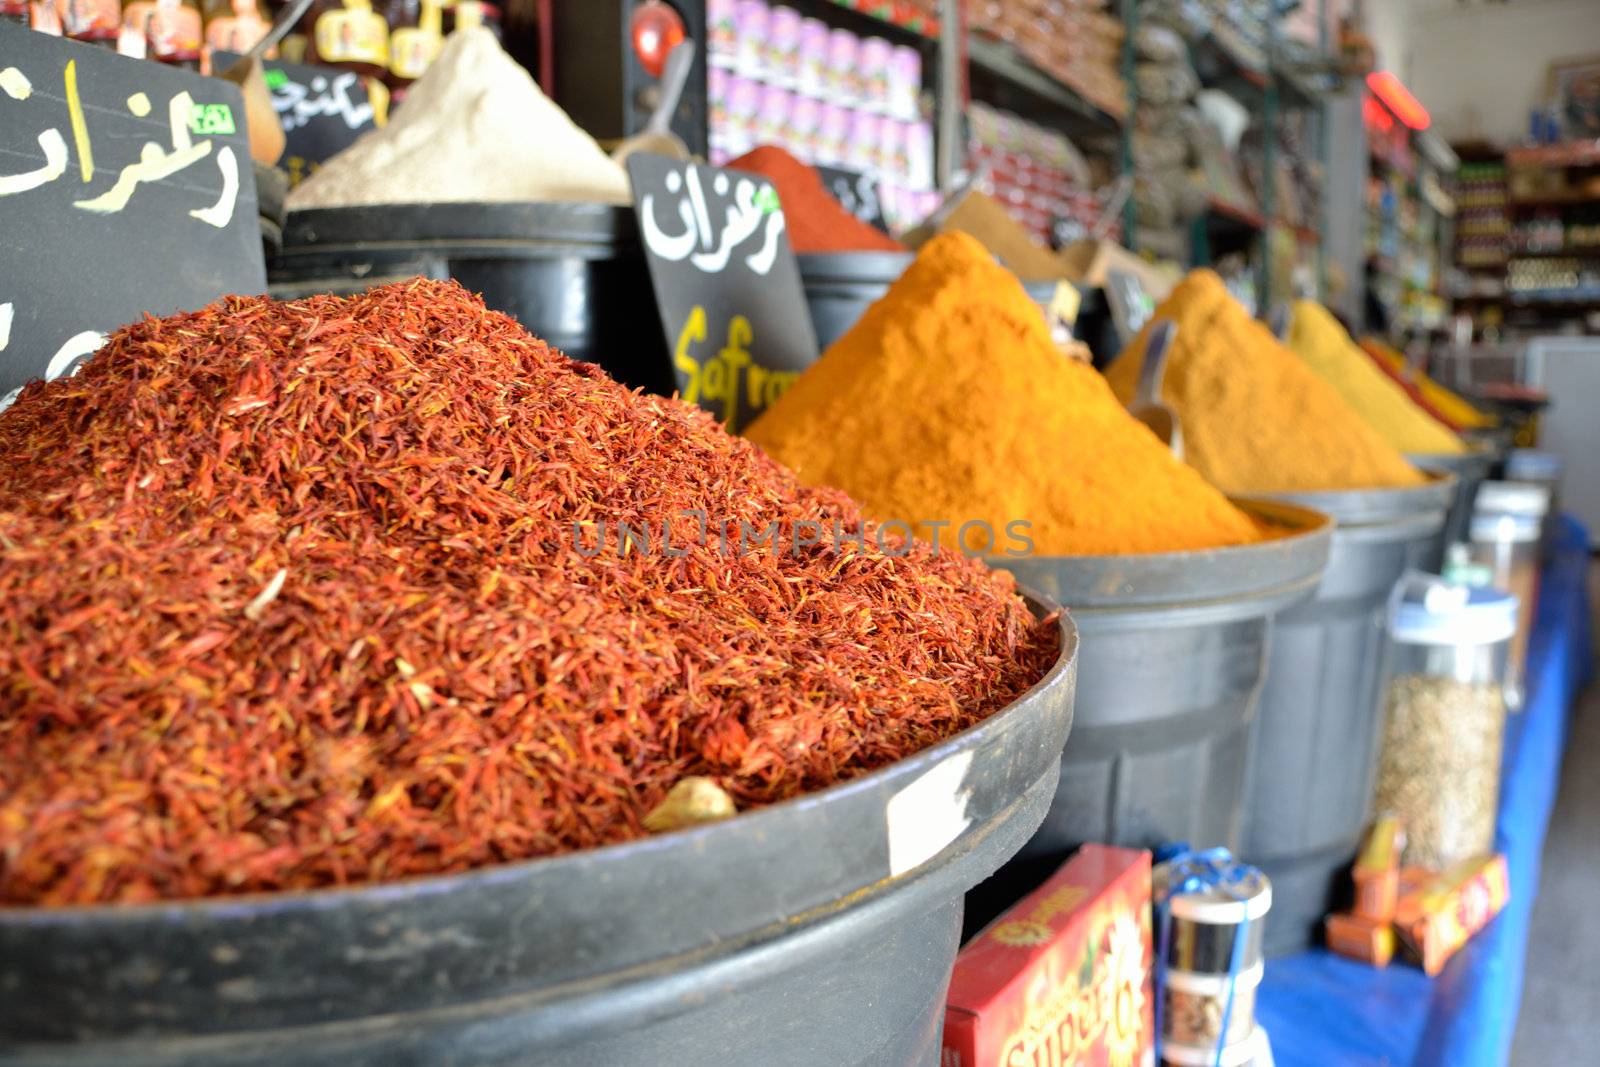 Safran and other spices at tunisian market.